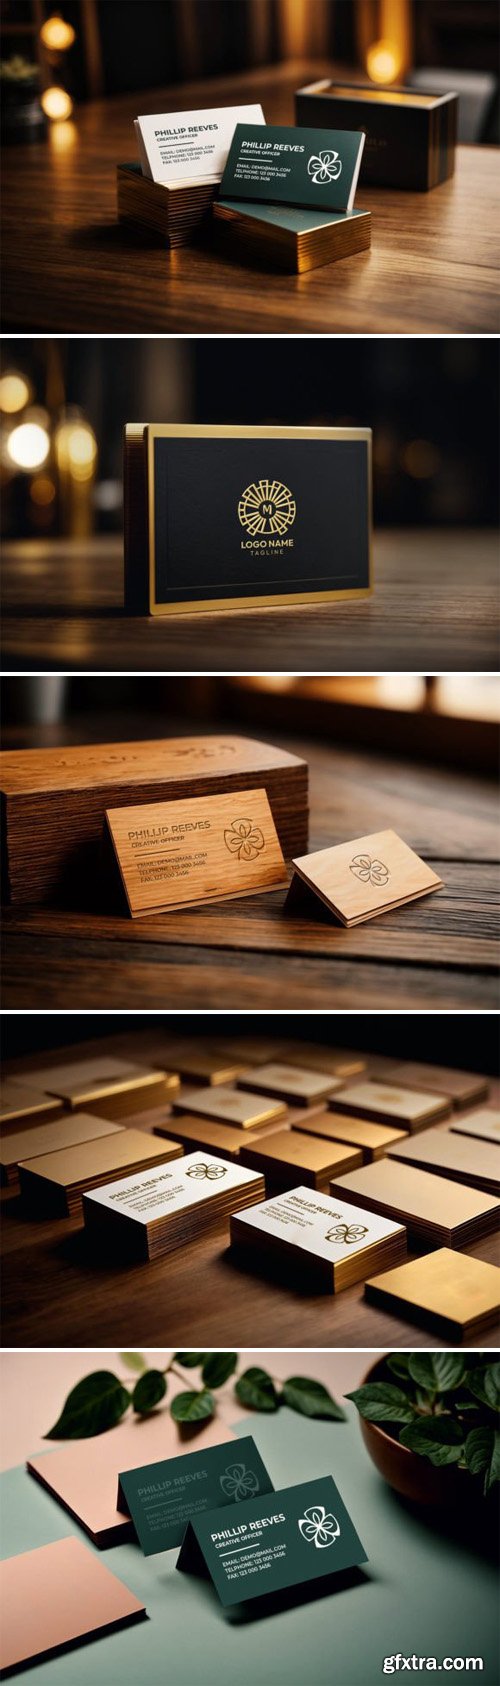 5 Luxury Business Cards PSD Mockups Templates